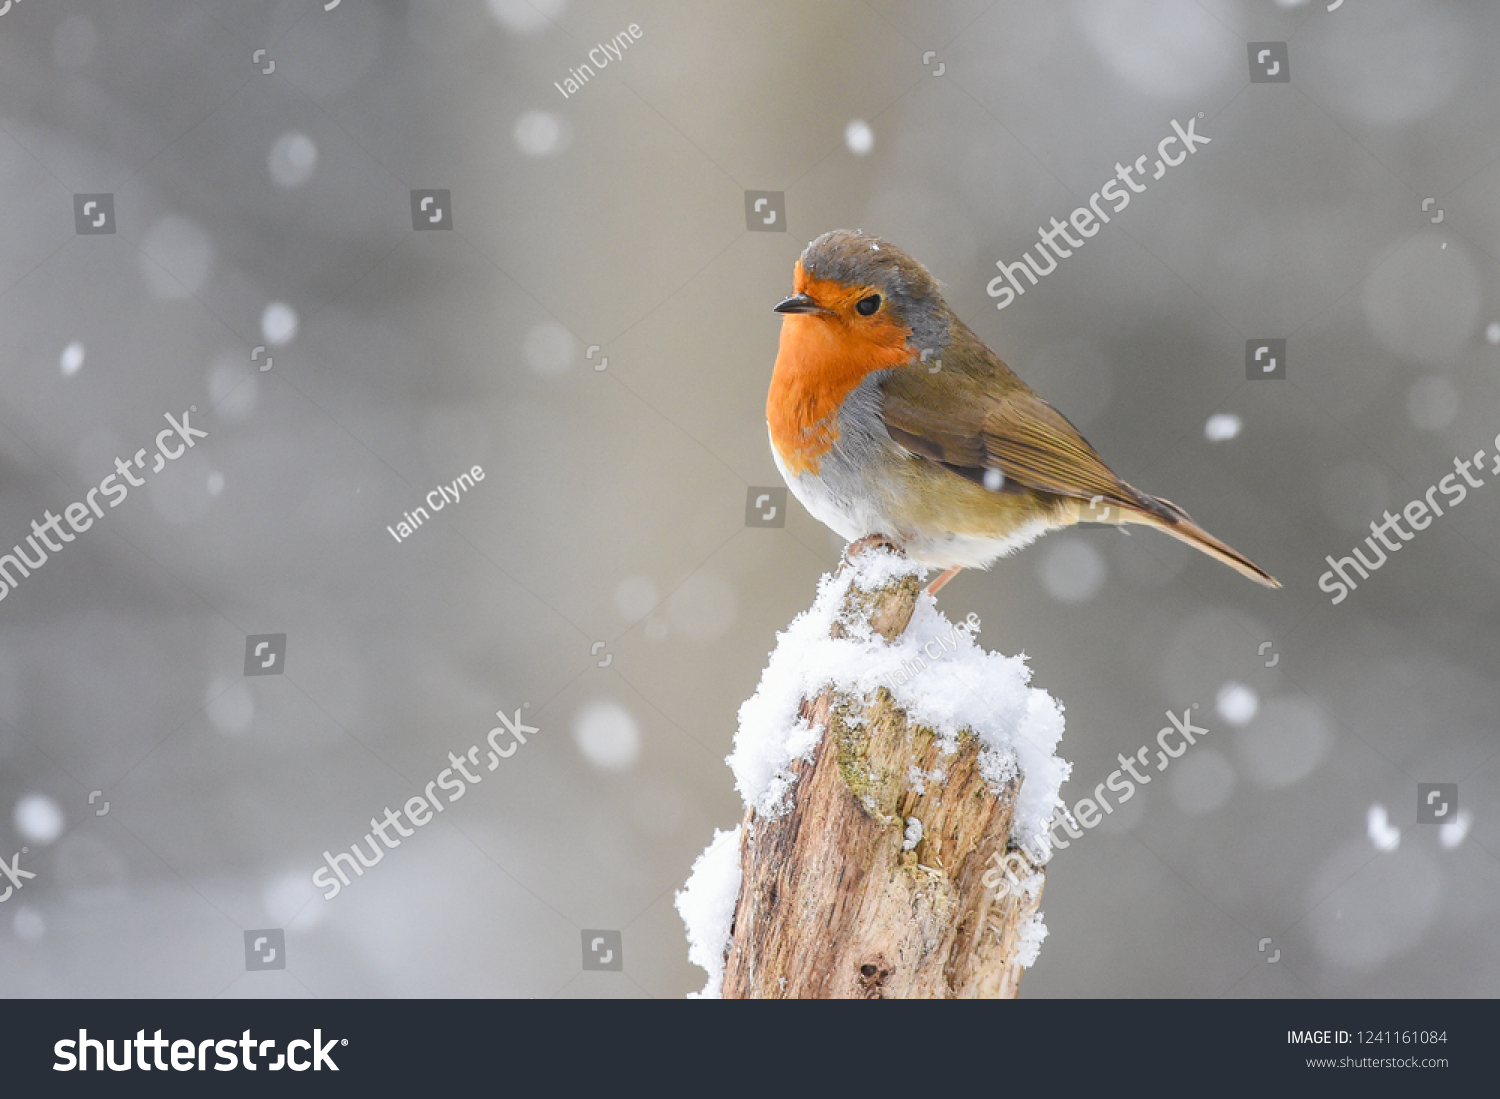 Robin on a branch in the snow. #1241161084